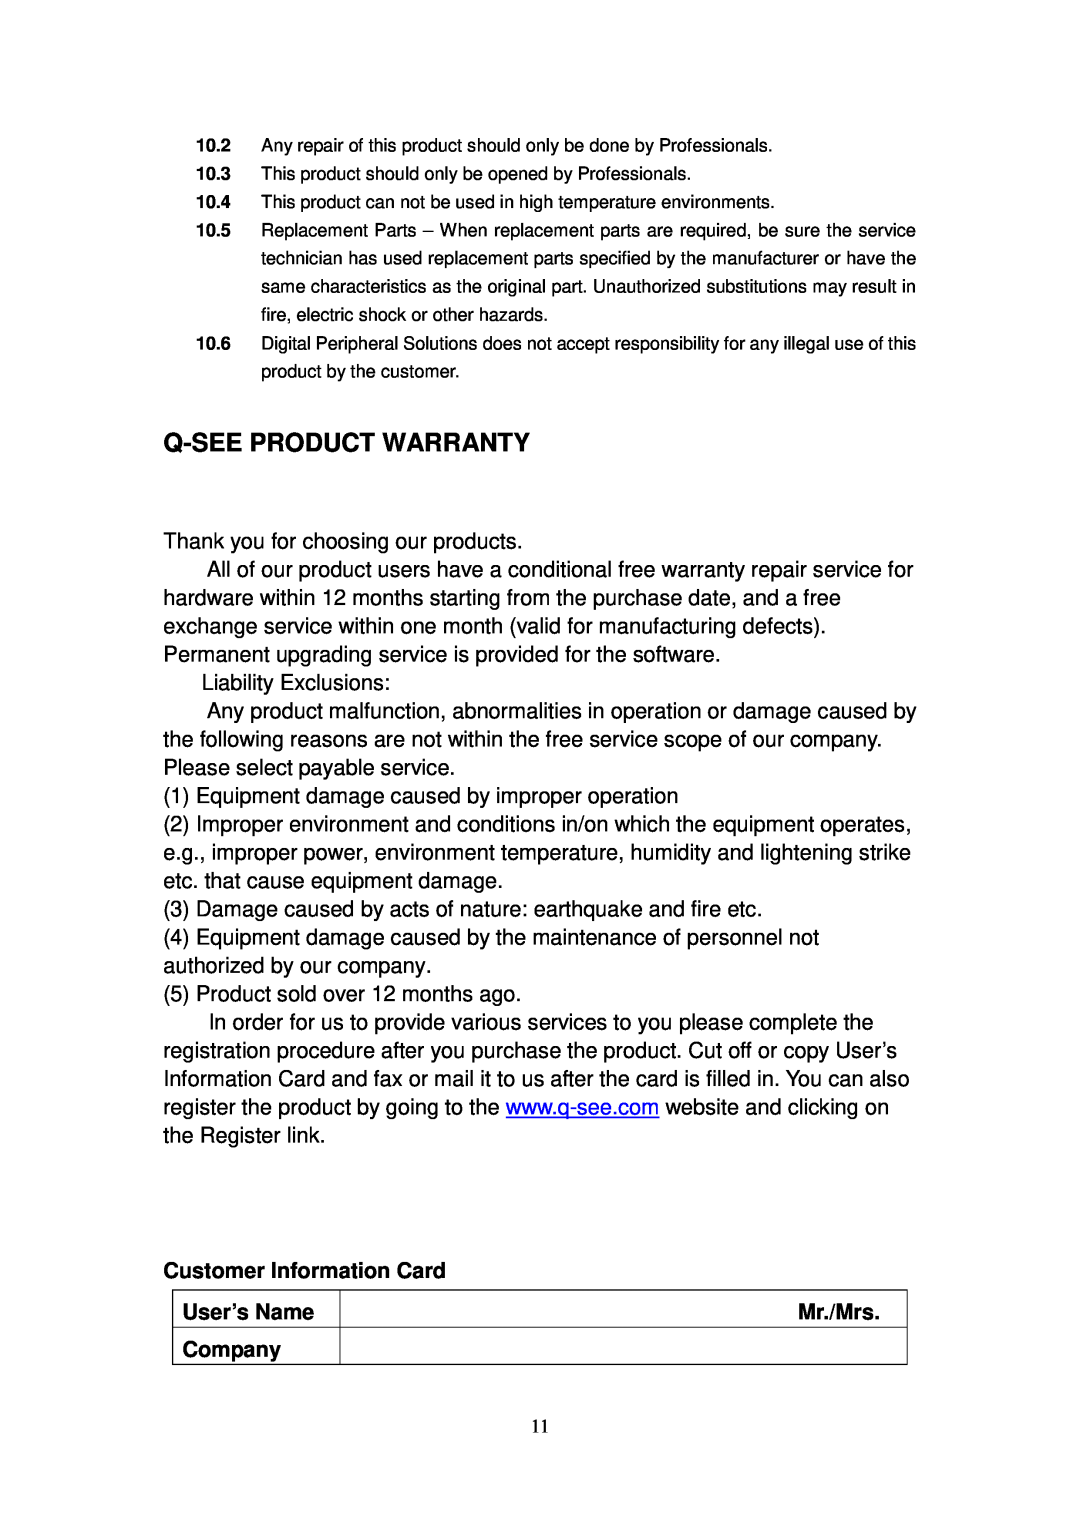 Q-See QSDT404C user manual Q-Seeproduct Warranty, Customer Information Card, User’s Name, Mr./Mrs, Company 